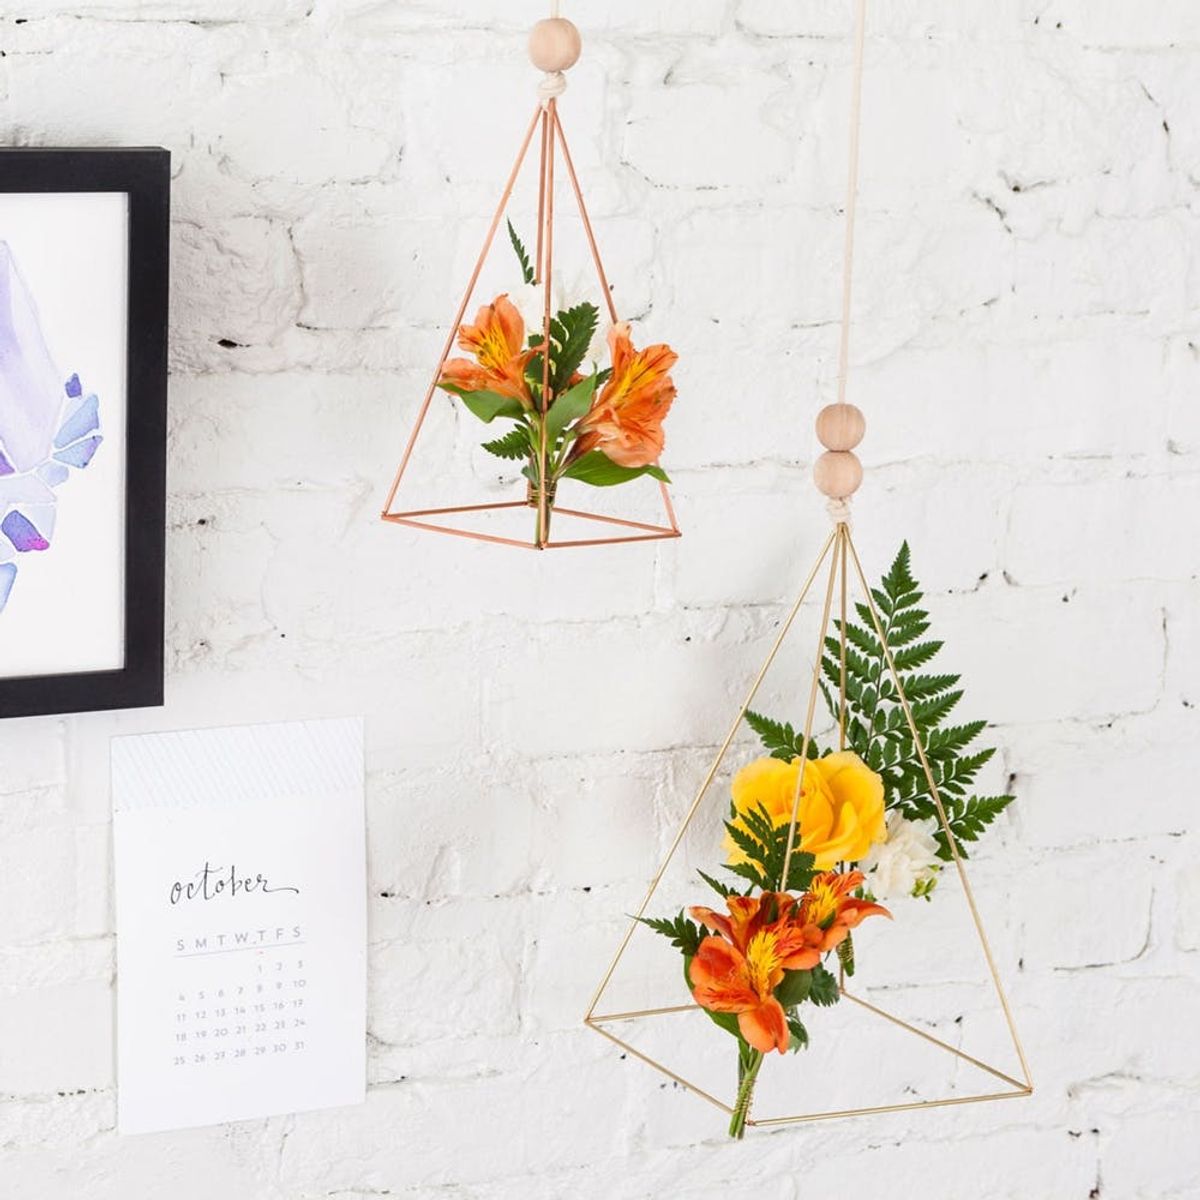 These Geometric Floral Mobiles Are Like Jewelry for Your Walls